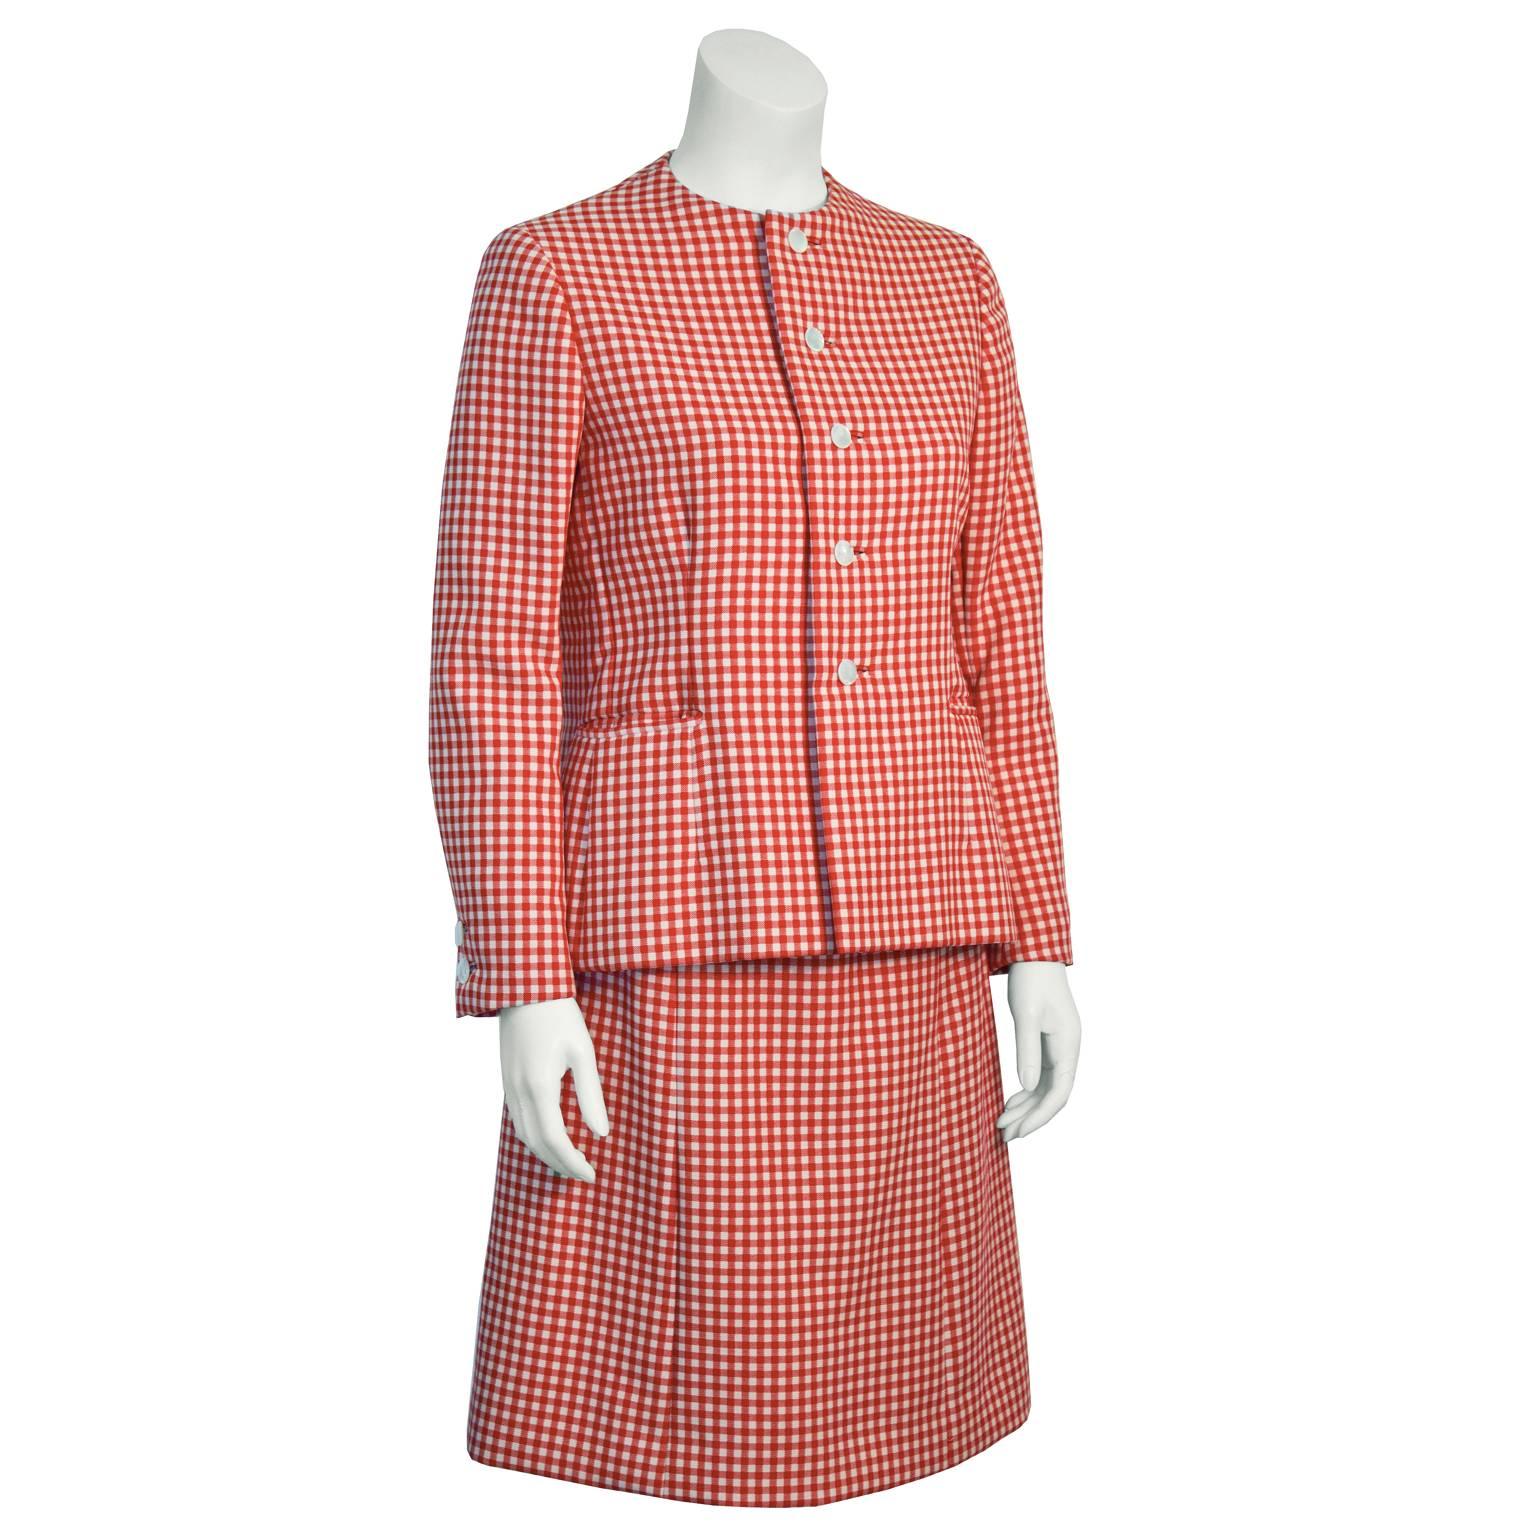 Adorable Norrell red and white gingham skirt suit from the 1960's. Collarless jacket has two patch pockets at the hips. Hips have slight flare, to create a more feminine silhouette. Front button closure with white buttons. Sleeves have two white